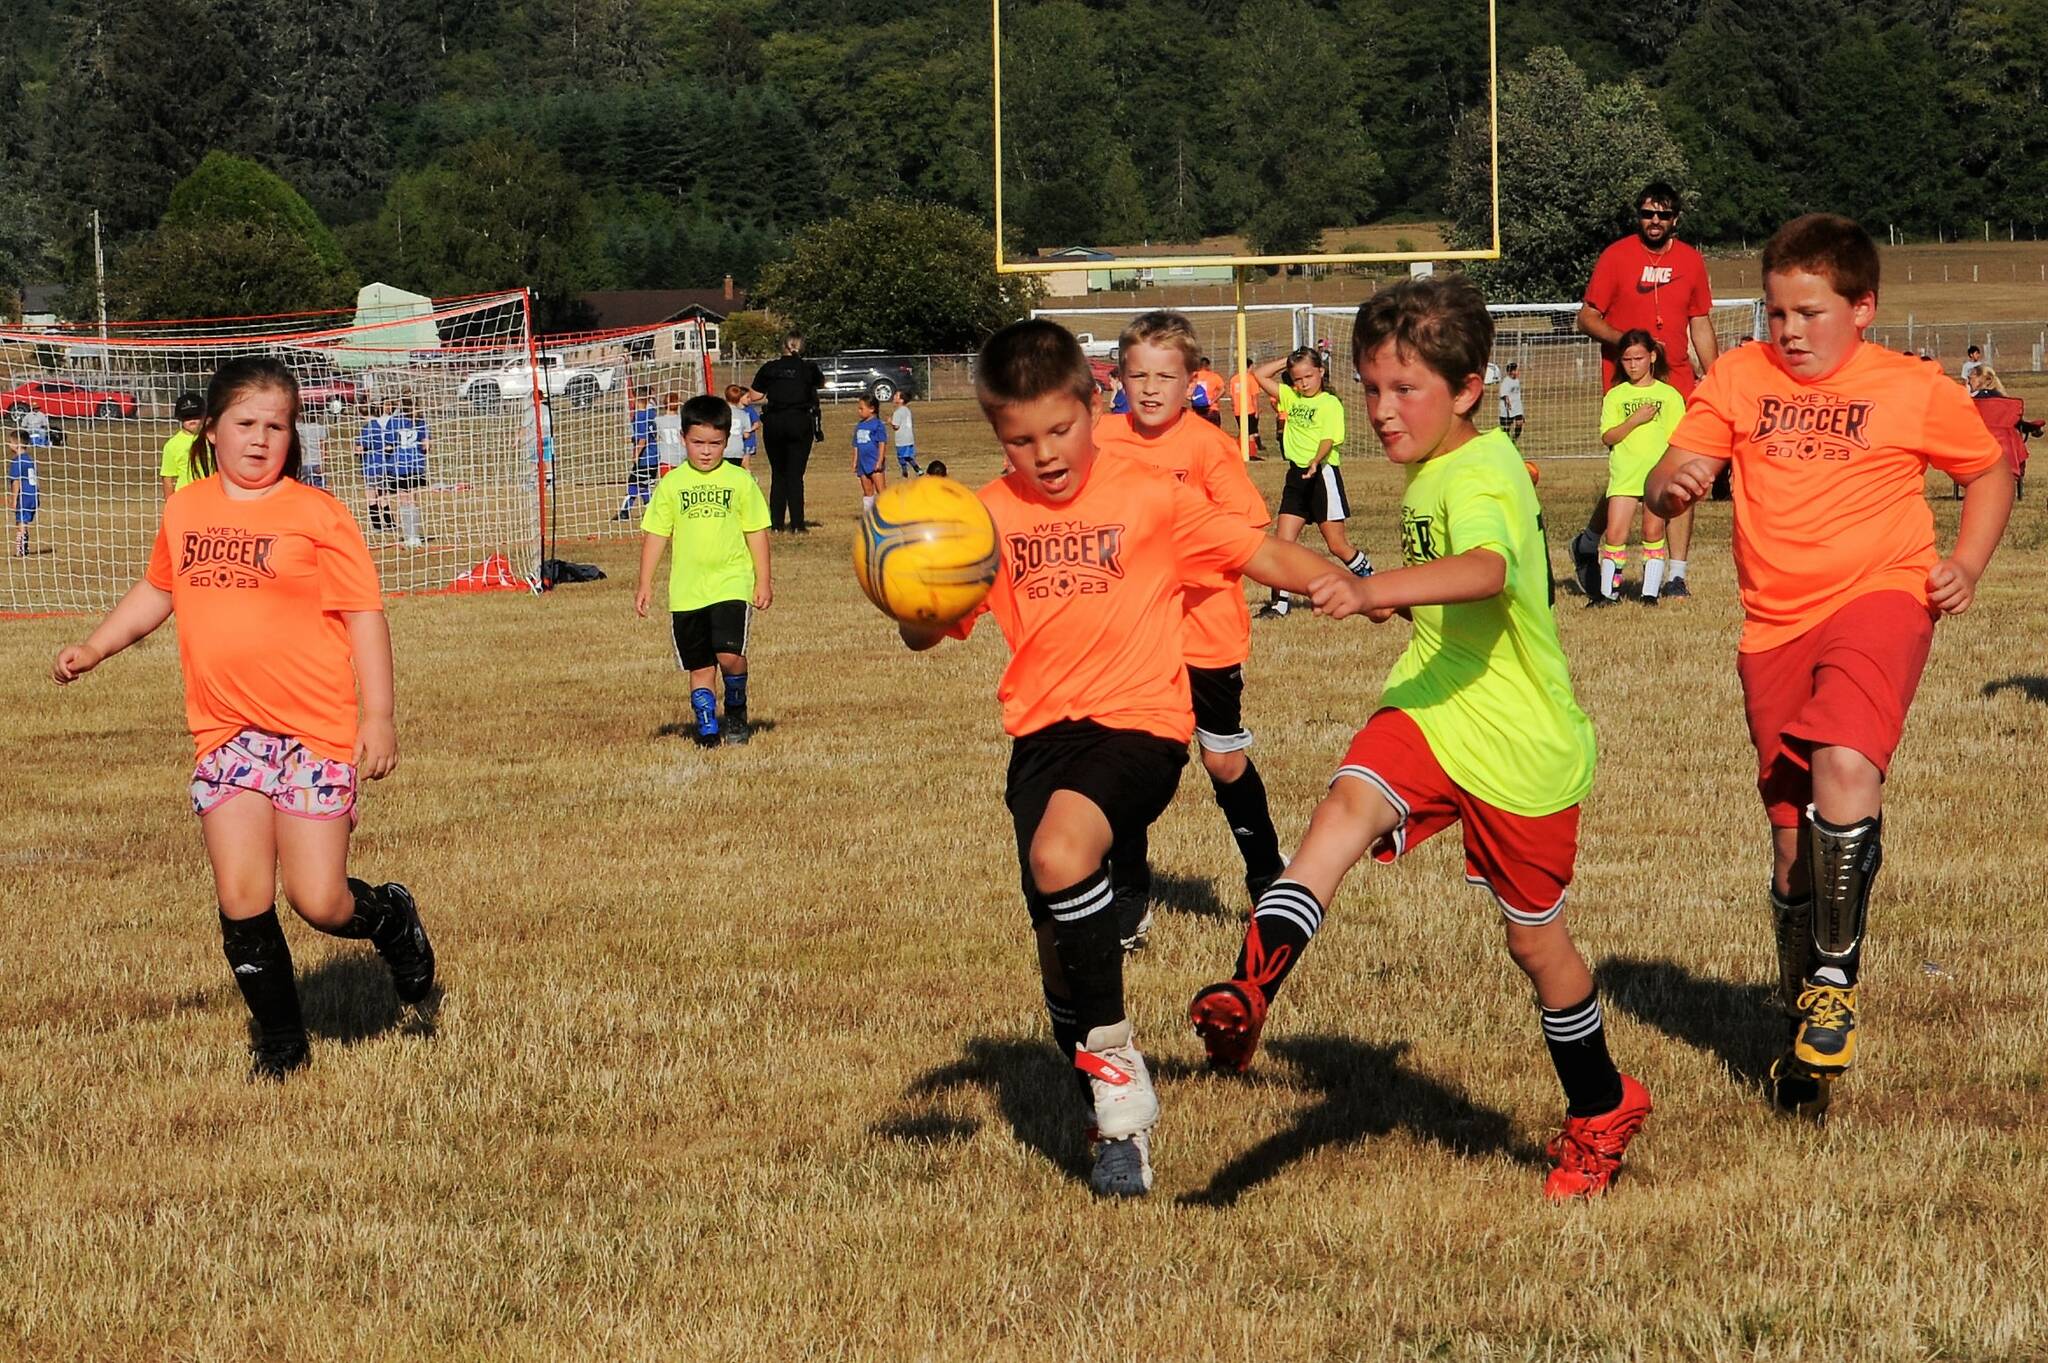 Pictured here in the 7 to 9 age bracket the Tigers in orange and the Yellow Bananas in yellow, and that makes sense, hustle for ball control. Perhaps these future Spartans are getting a good jump on what could come a few years down the road as they just might compete in the 2B Pacific Soccer League. As for now, however, they enjoy competing against classmates in a friendly atmosphere. And yes, thanks to the many volunteers, these kids are getting a real kick out of soccer.